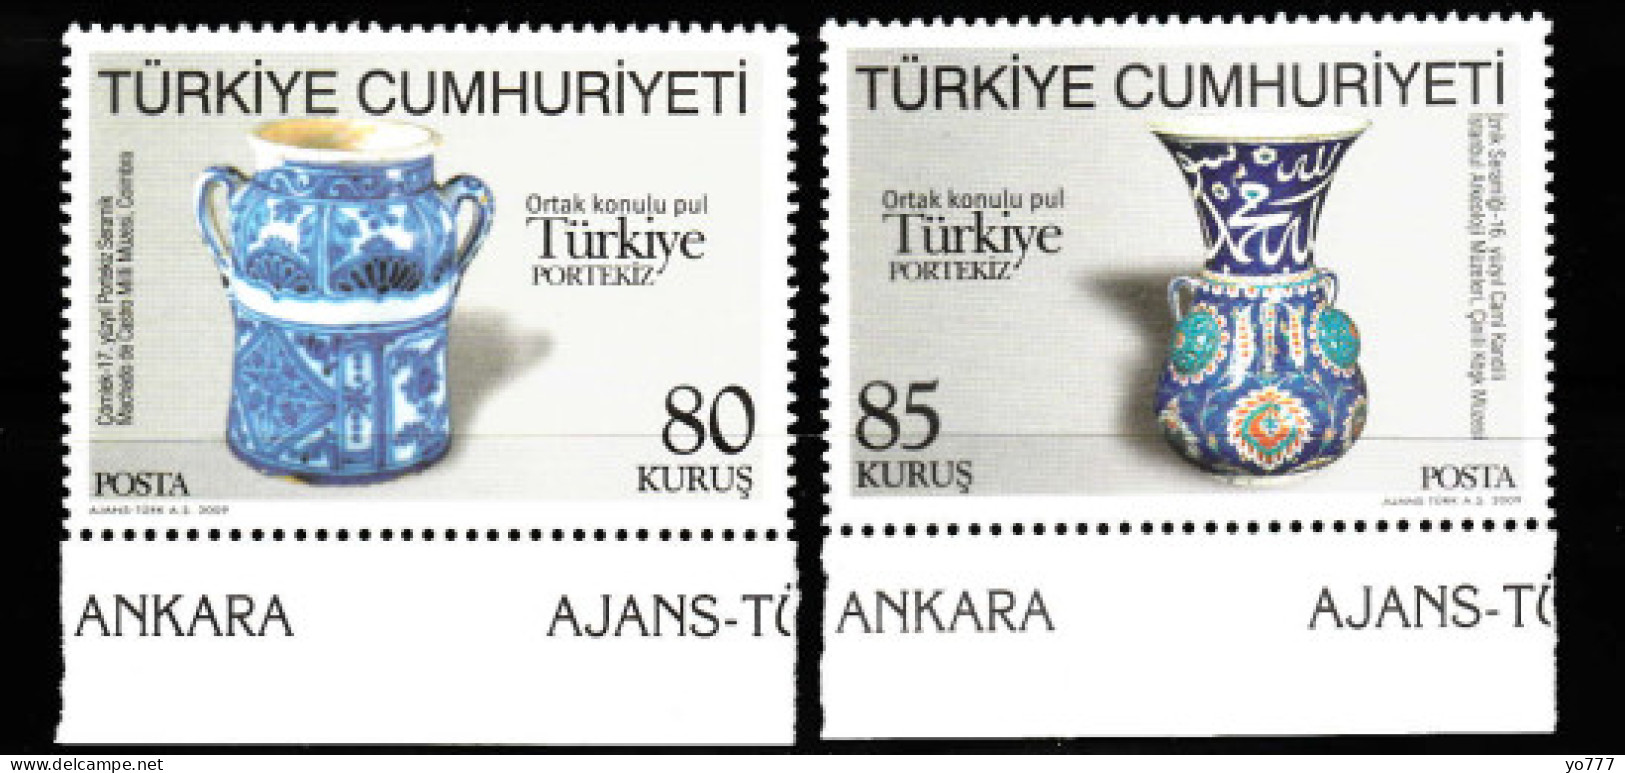 (3734-35) JOINT ISSUE OF STAMPS BETWEEN TURKEY-PORTUGAL MNH ** - Nuevos